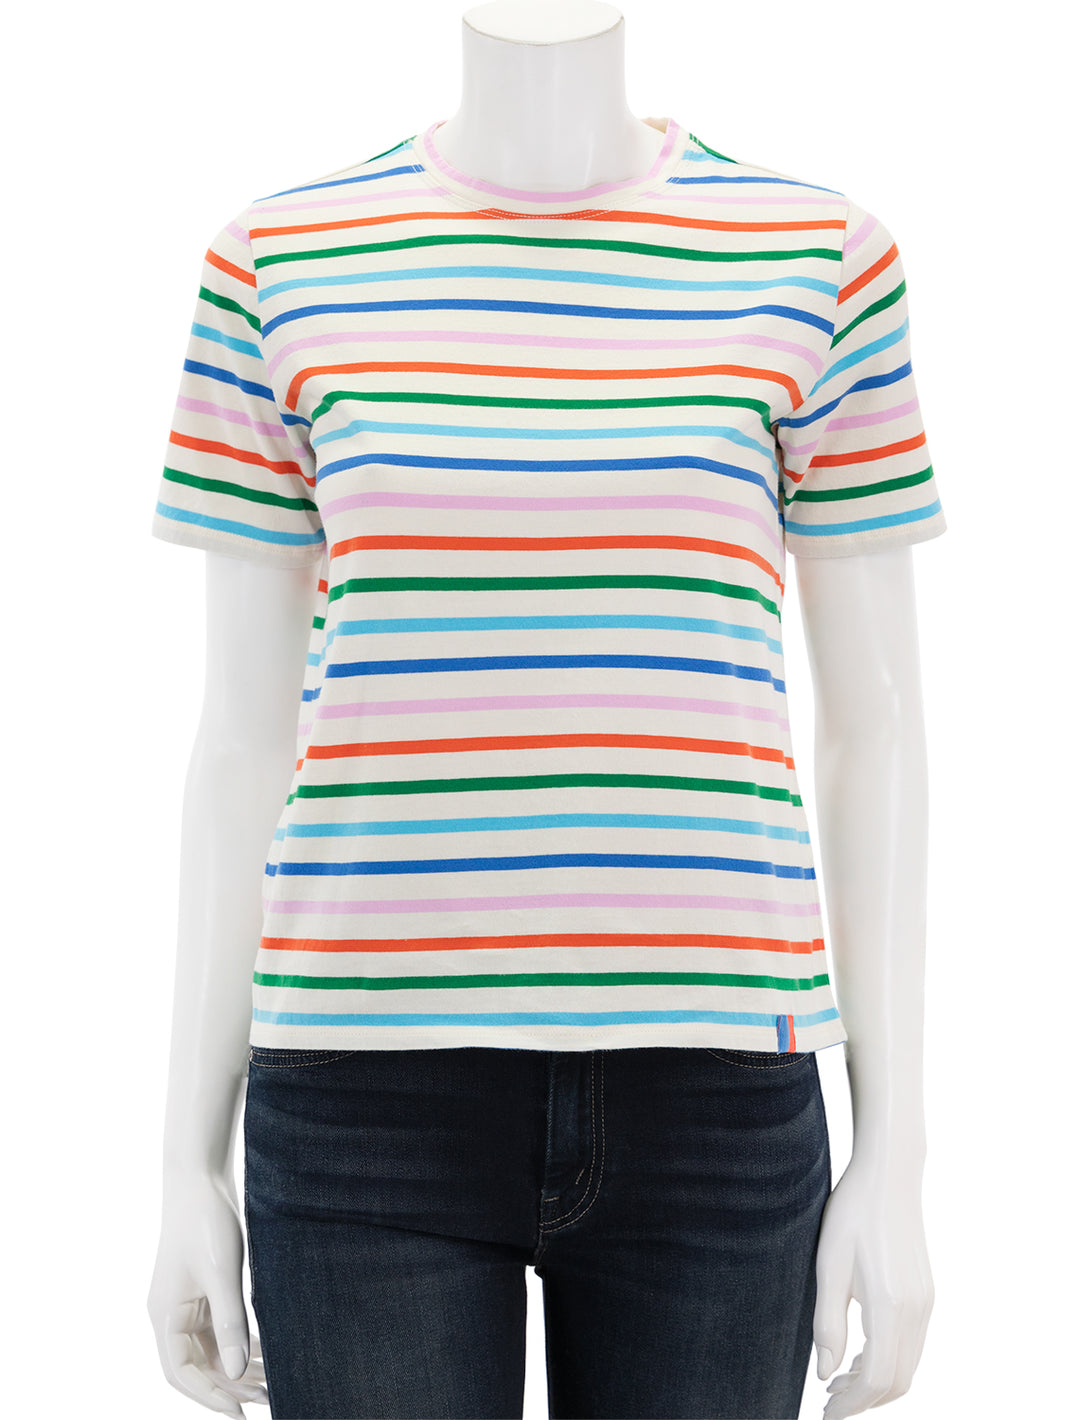 Front view of KULE's the modern tee in rainbow.